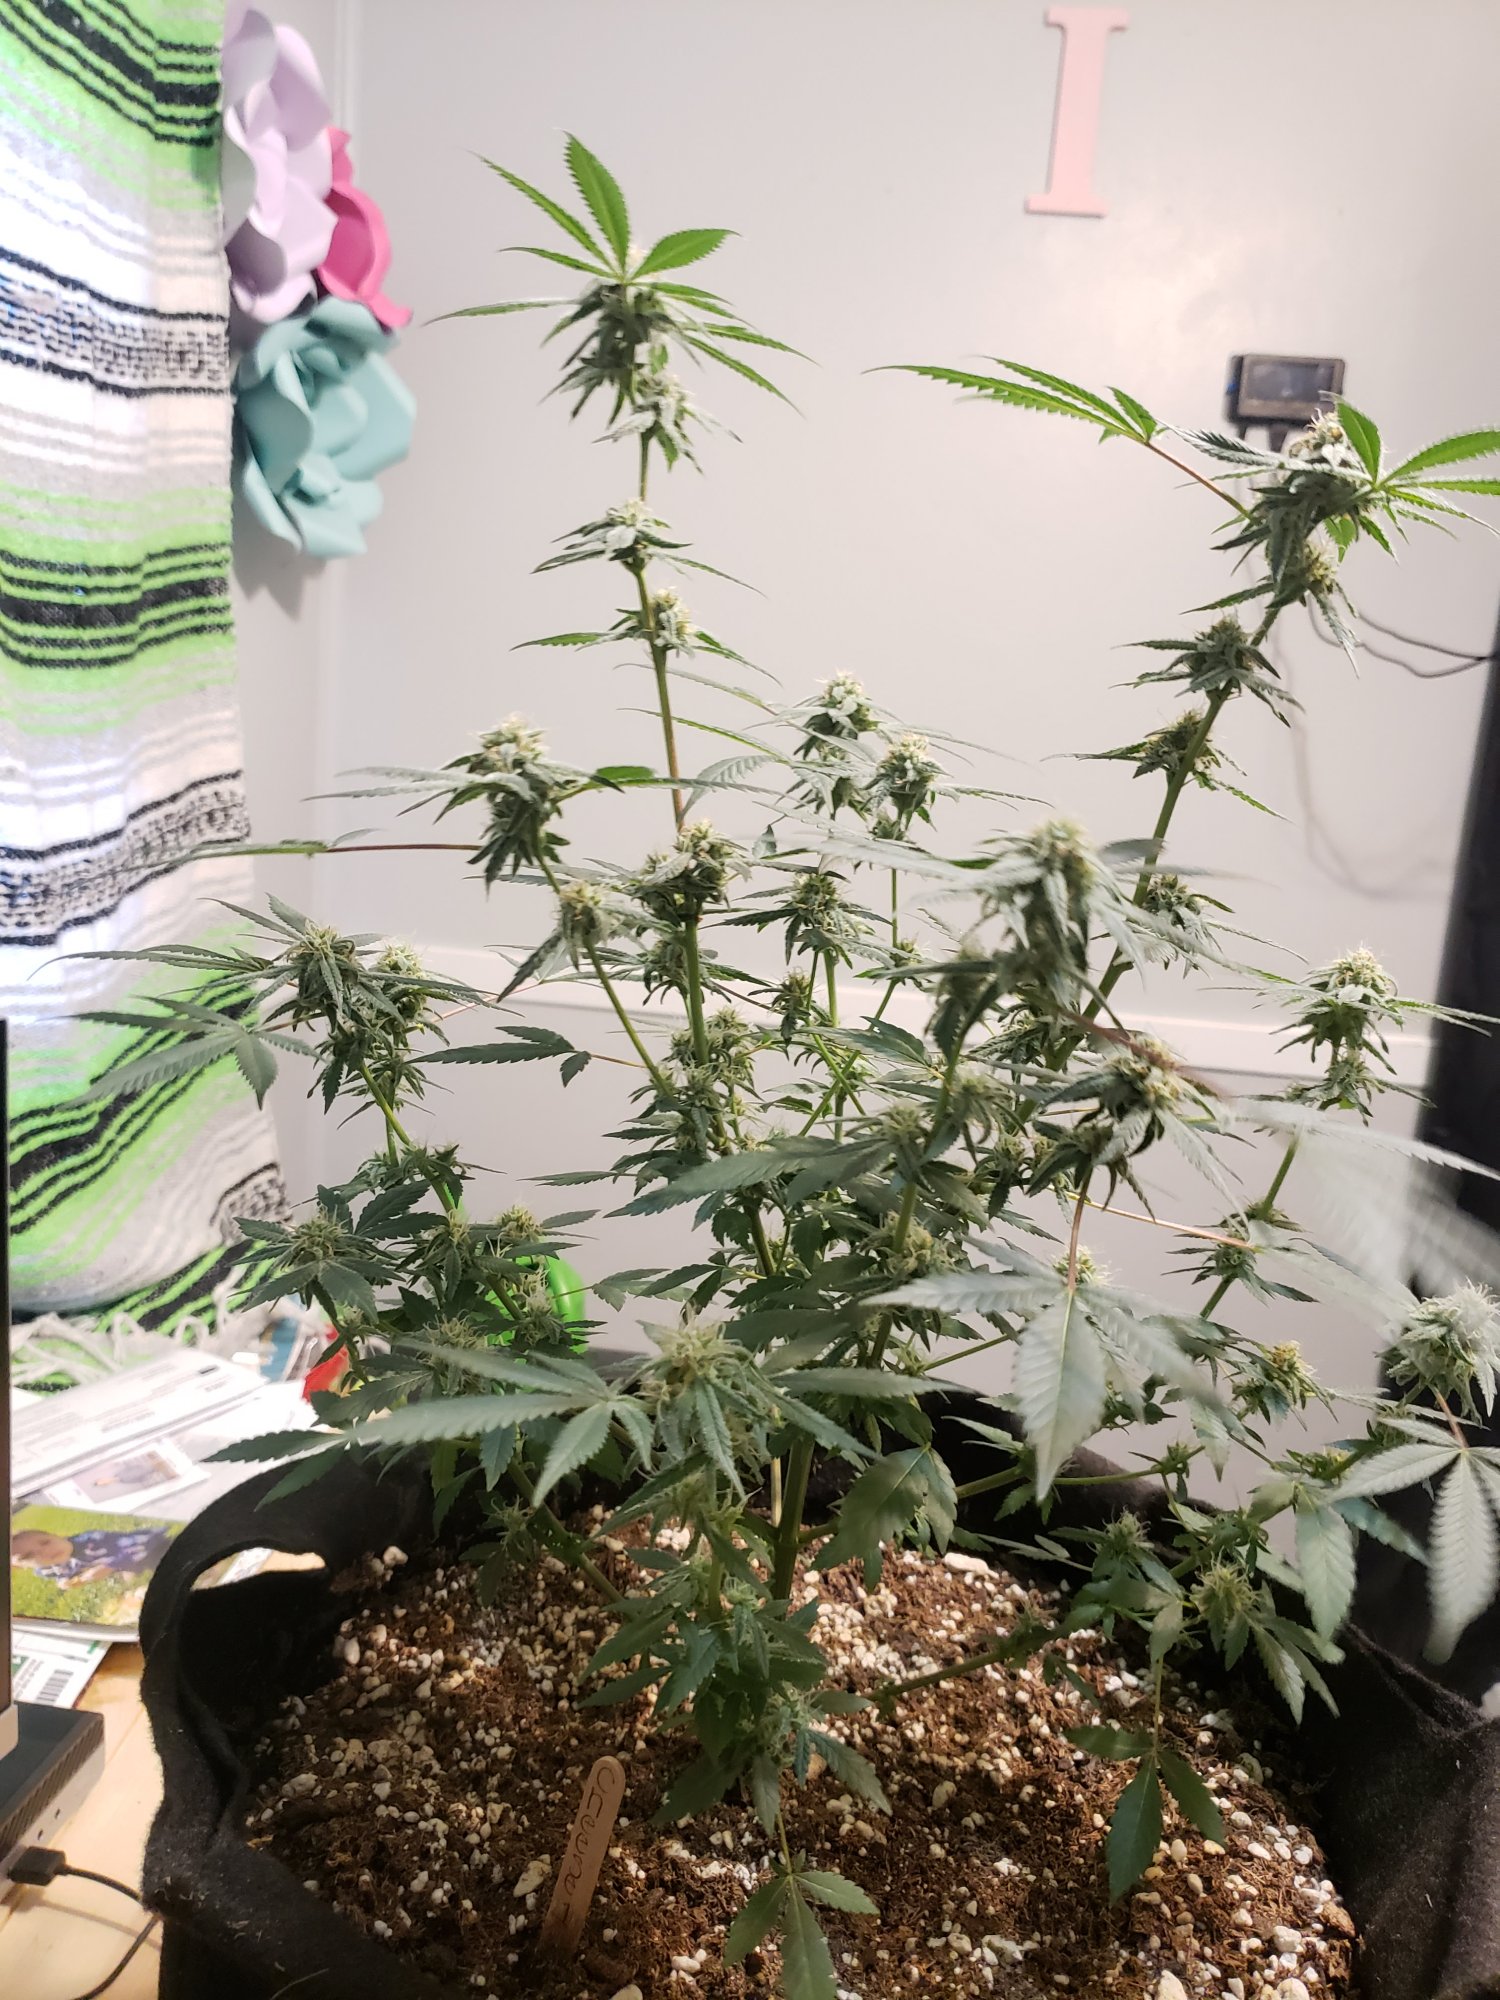 First grow month into flower 10